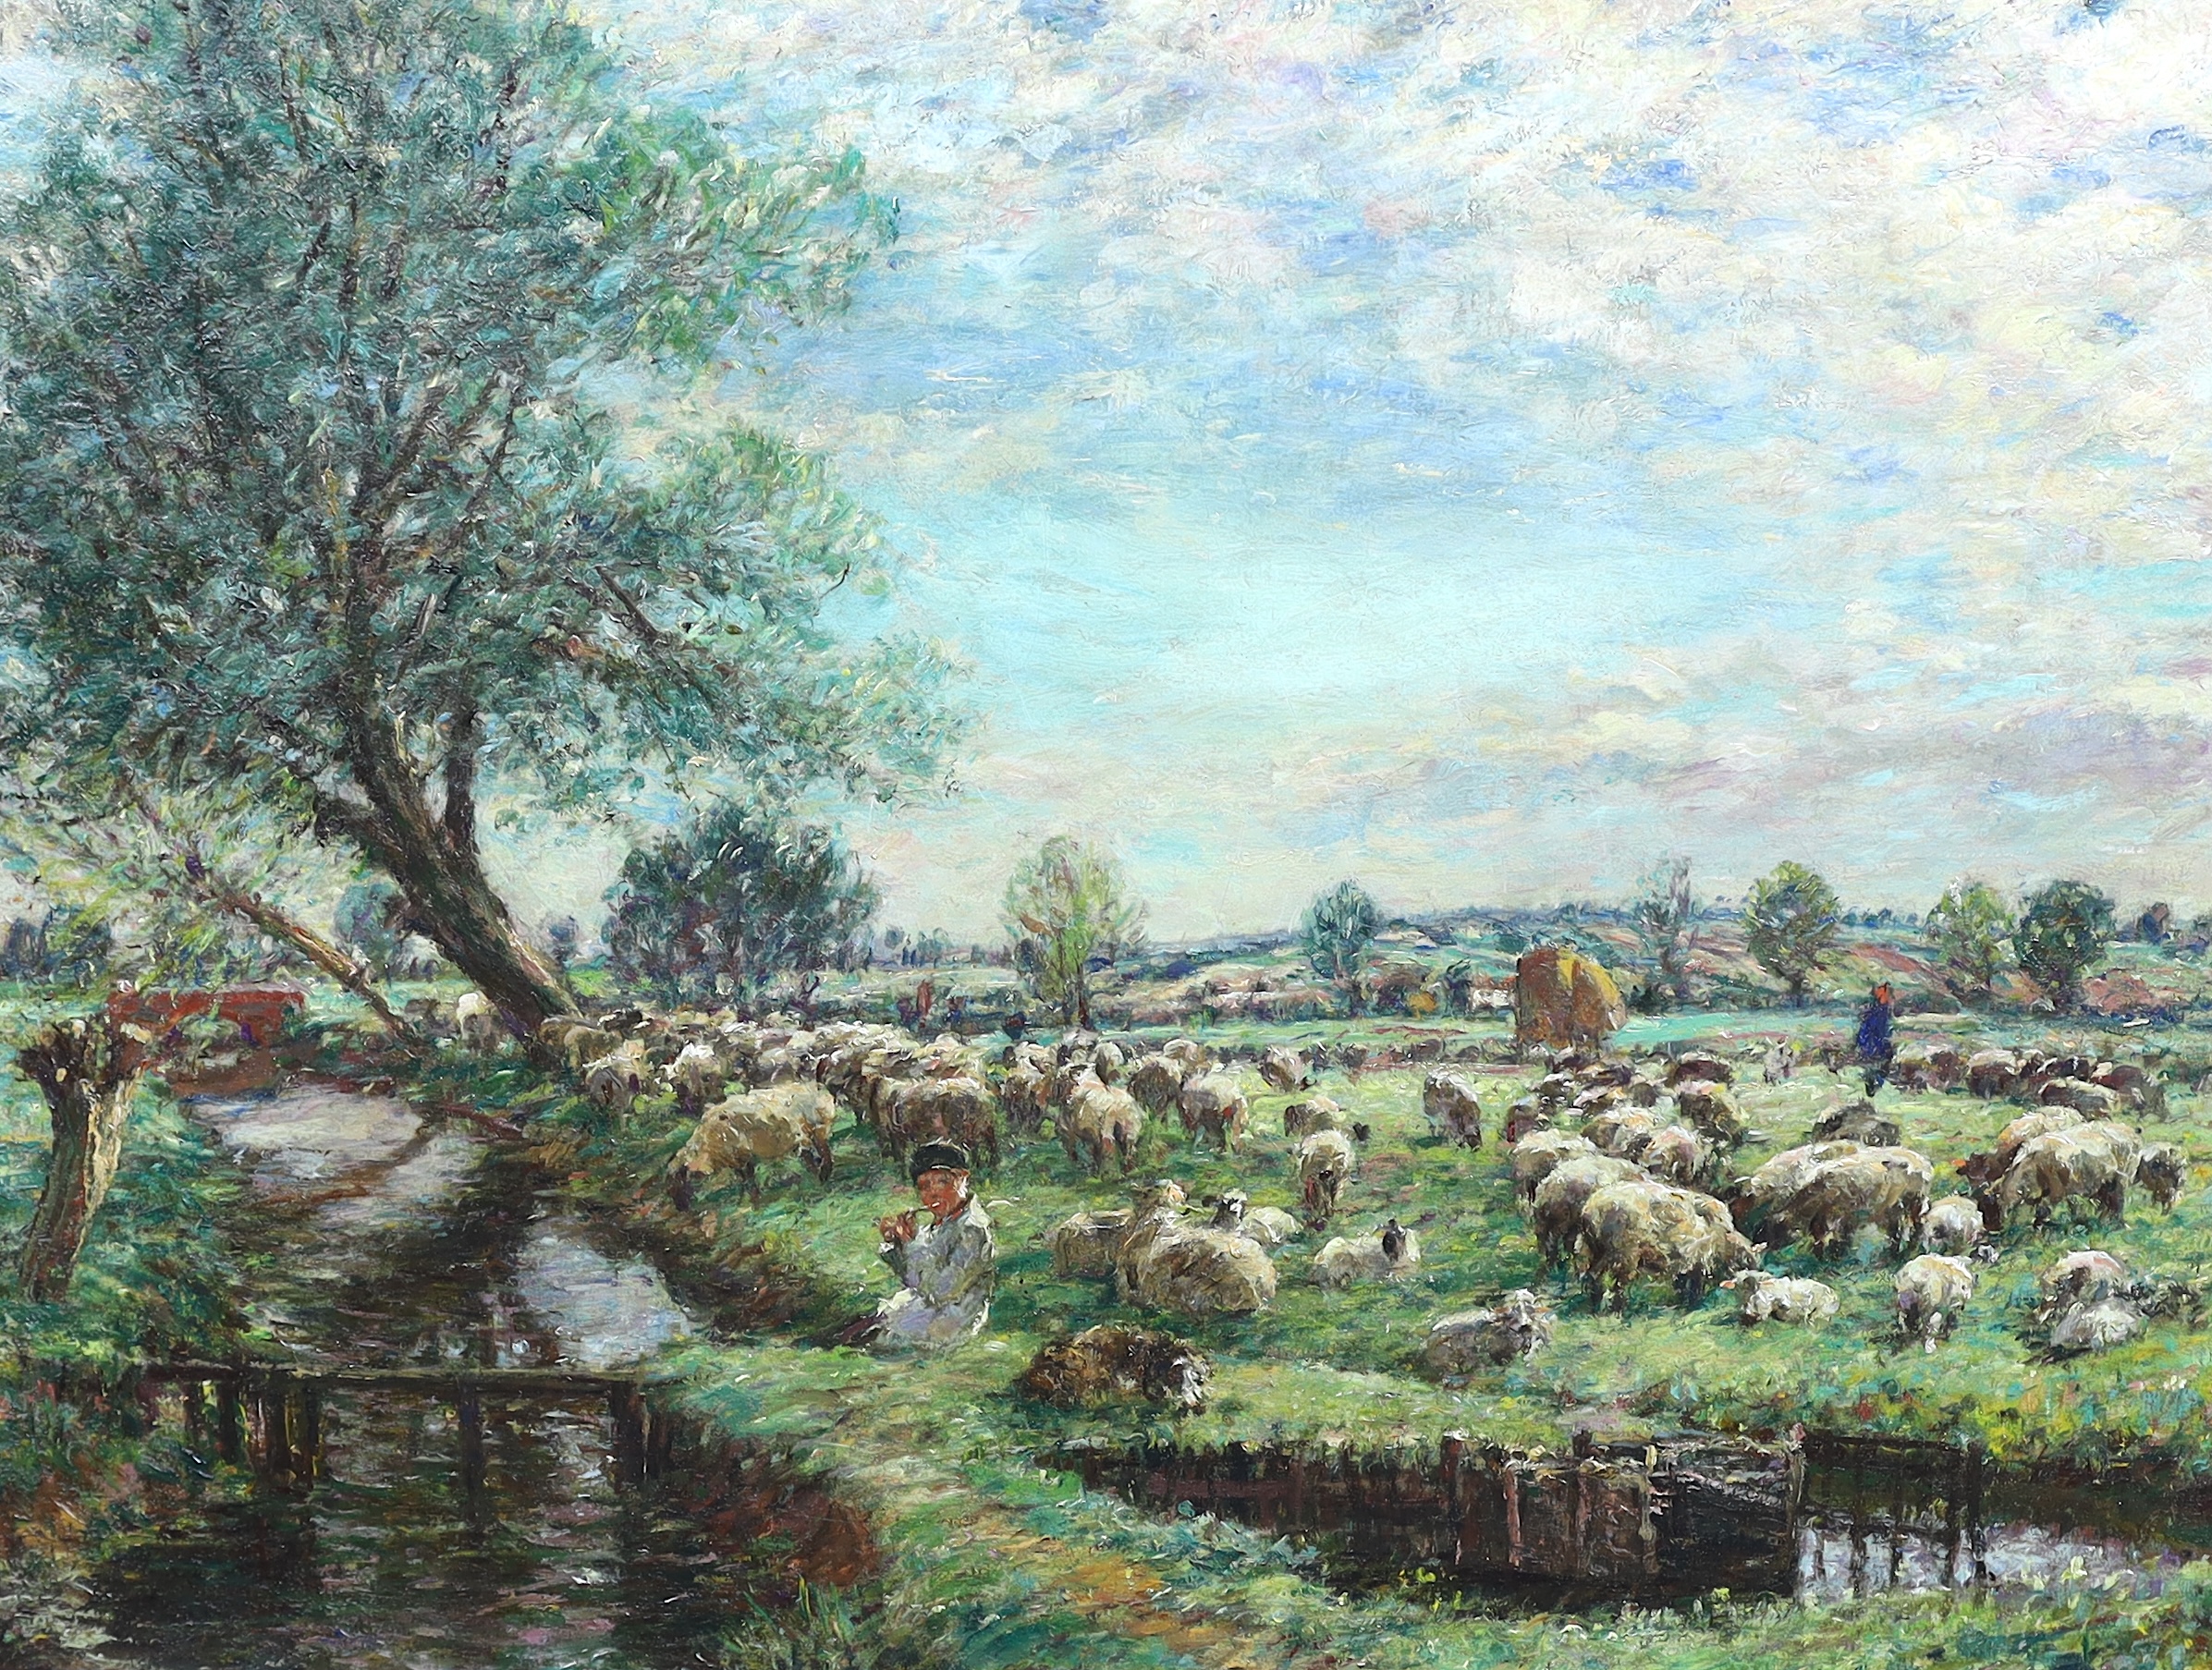 William Mark Fisher (American 1841-1923), Sheep in a water meadow, oil on canvas, 65 x 85cm